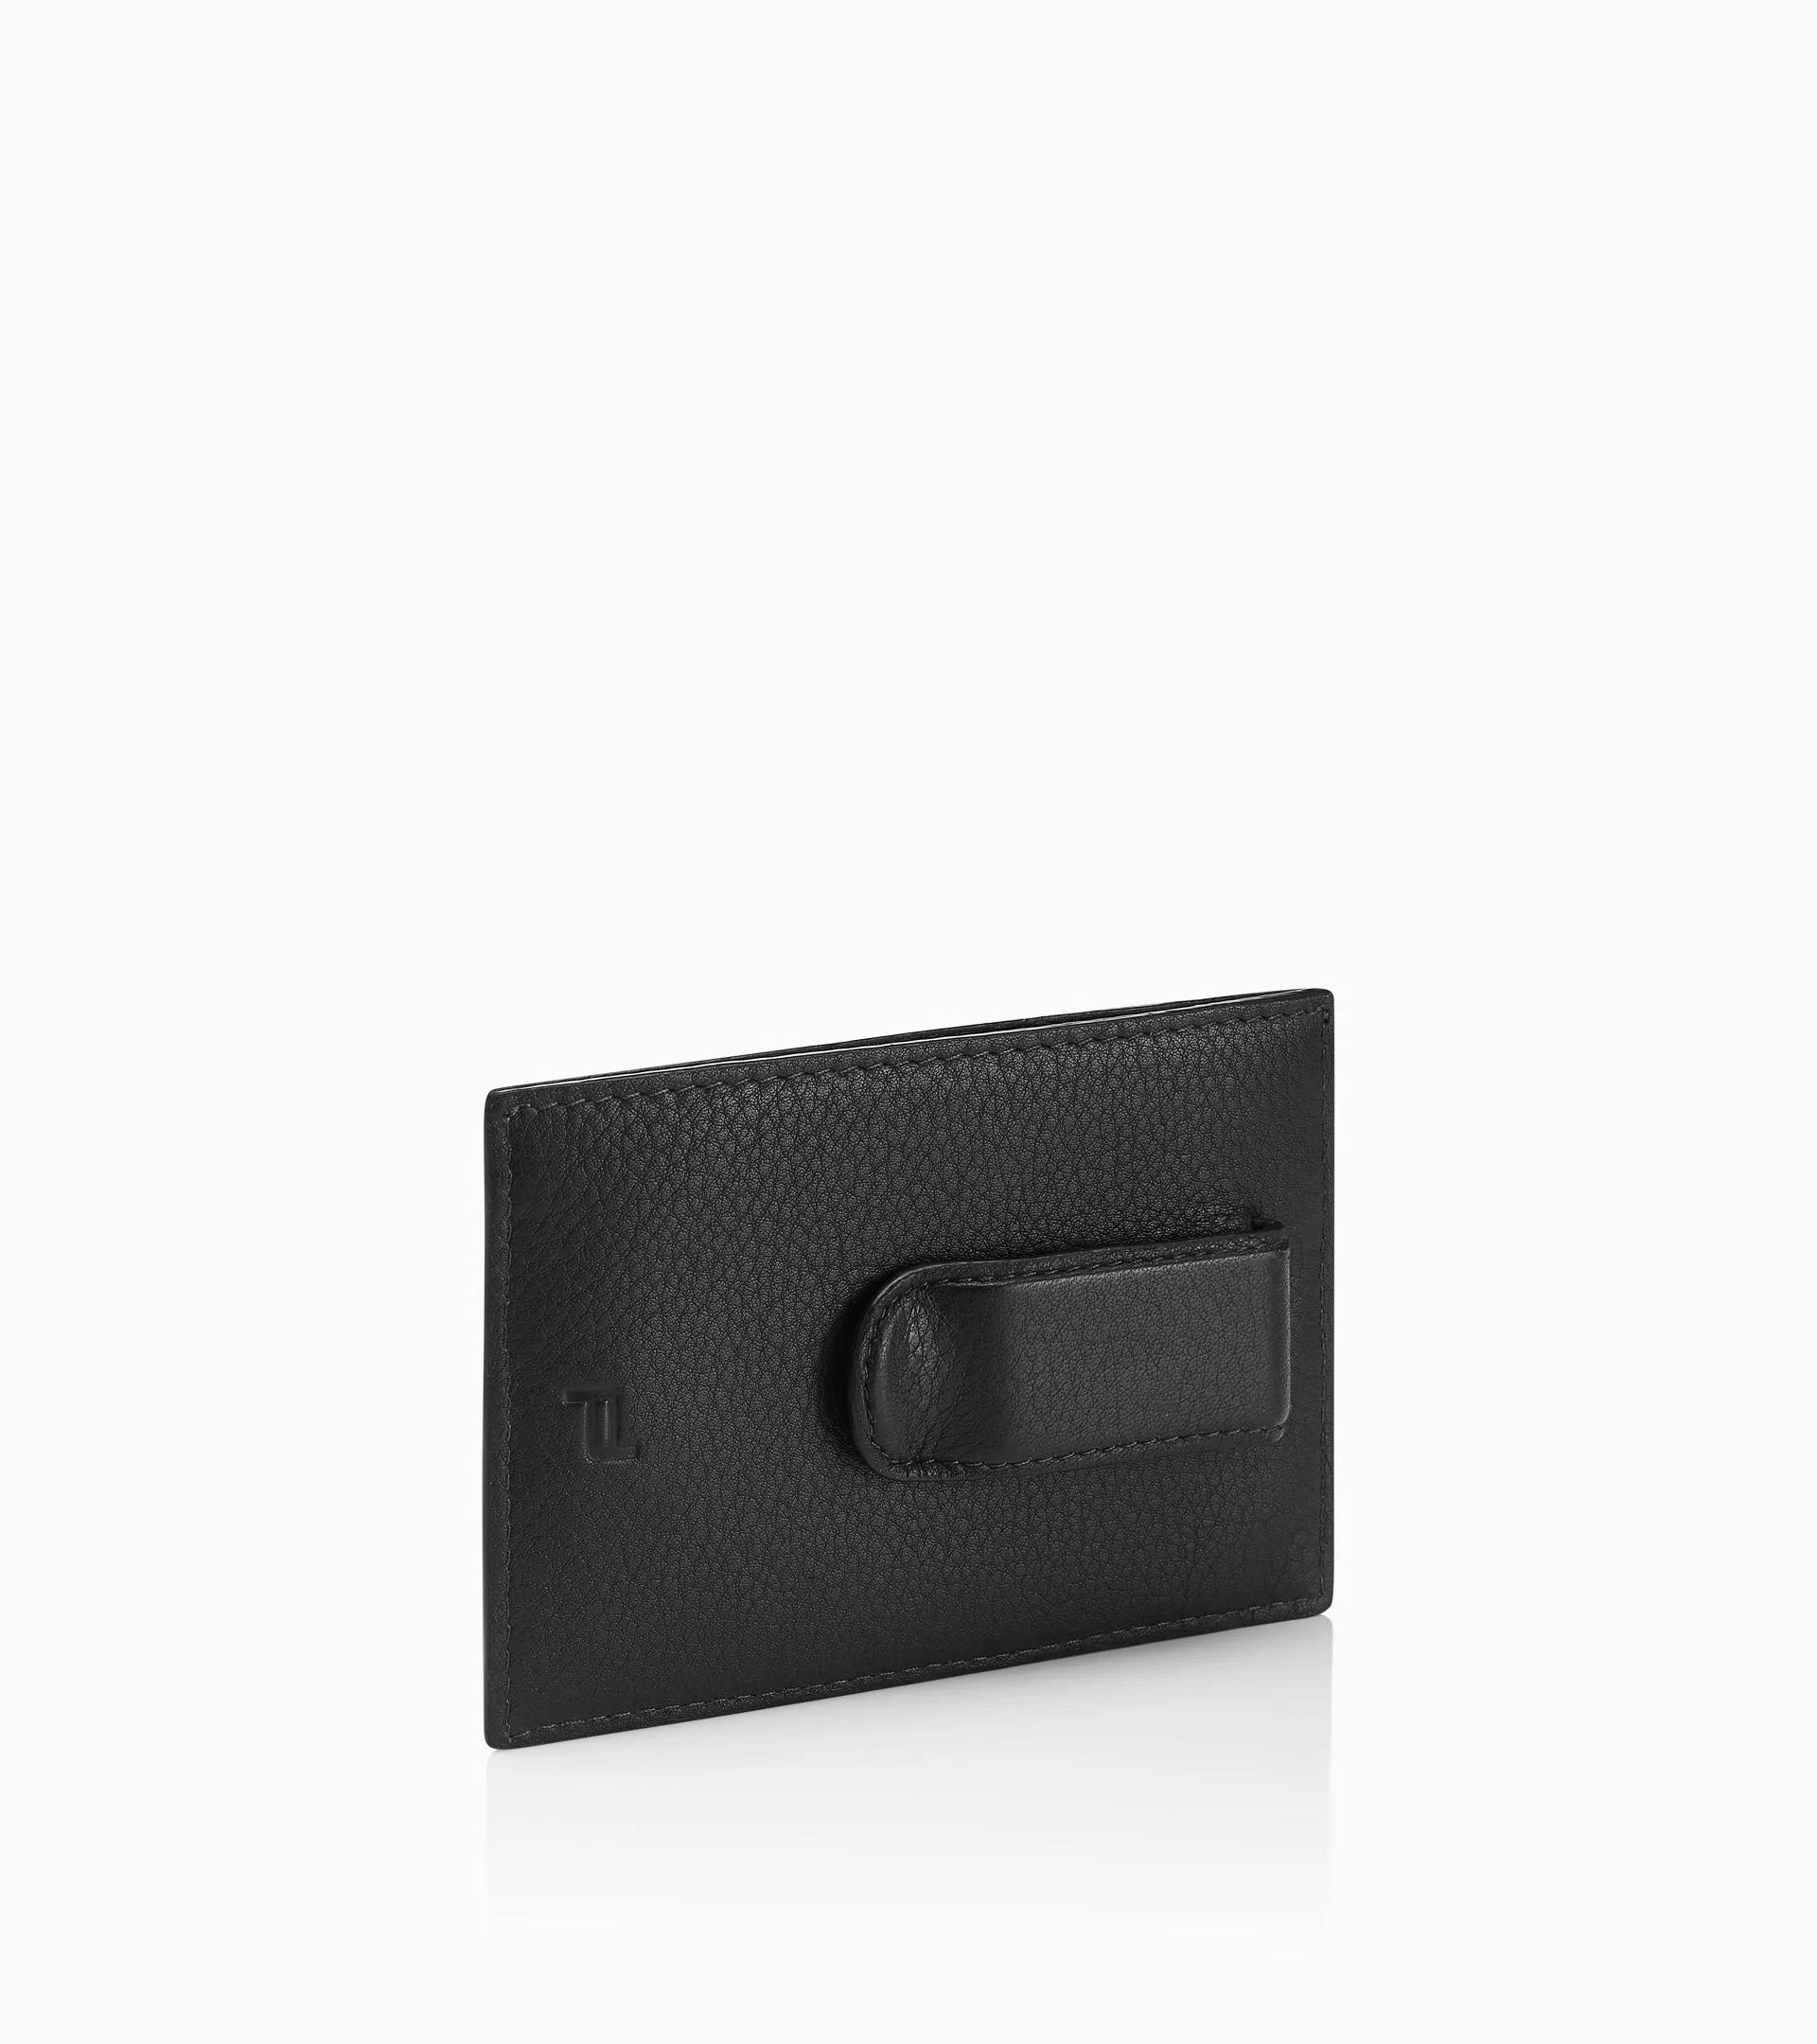 Business Card Holder 2 with Money Clip 2